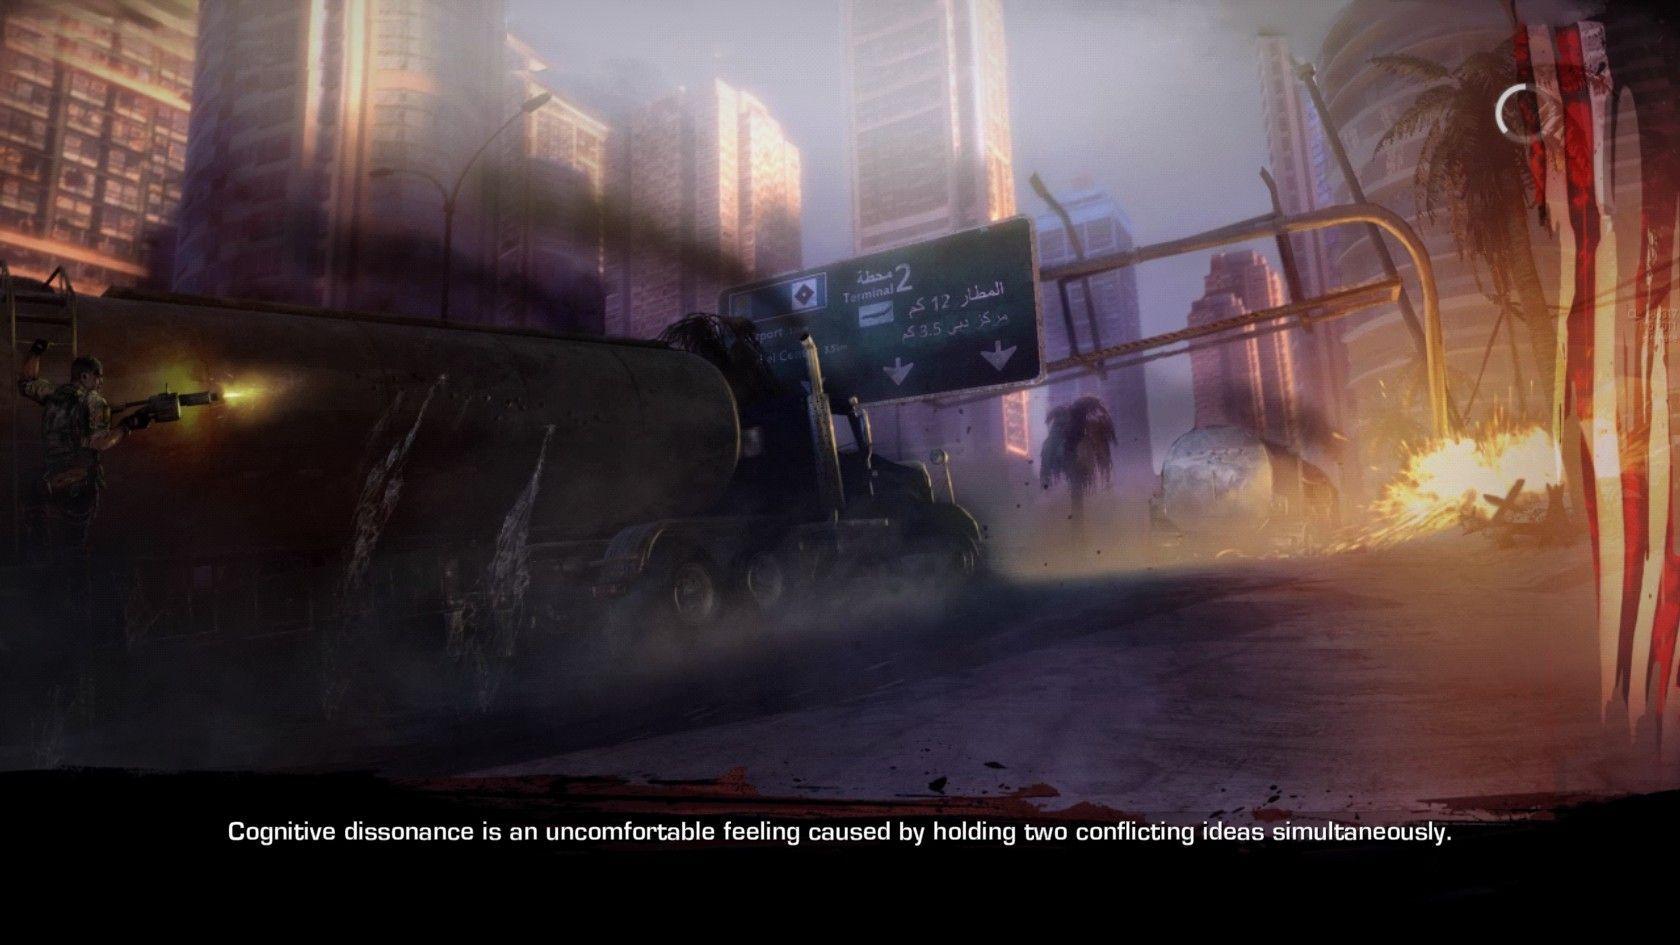 These Loading Screens from Spec Ops: The Line are Chilling